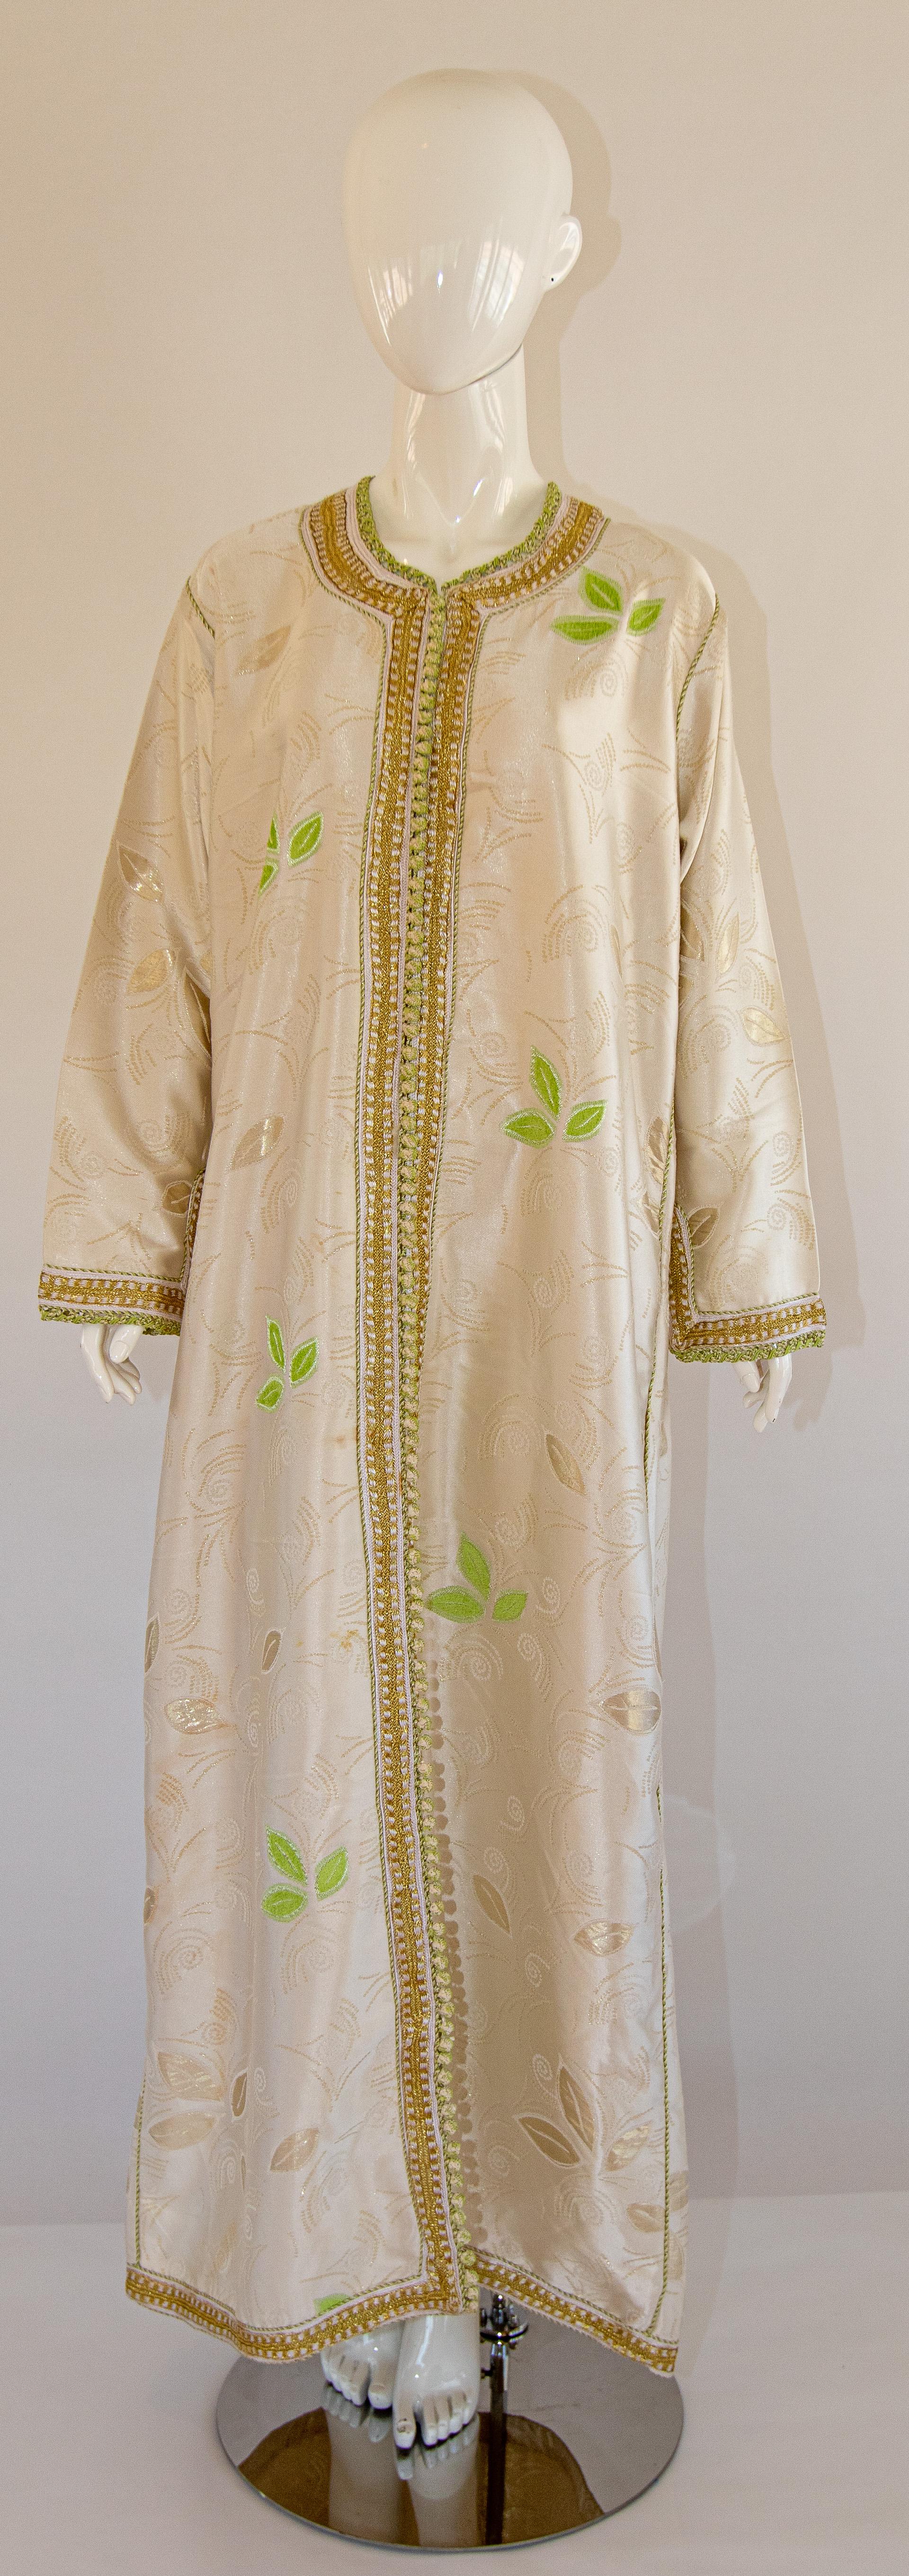 Elegant Moroccan caftan silk gold damask gorgeous vintage hostess gown.
Light green floral leaf design on silk Kaftan circa 1970s.
Exotic oriental long maxi caftan dress with long sleeves in shimmering brocade beige and gold fabric.
One of a kind